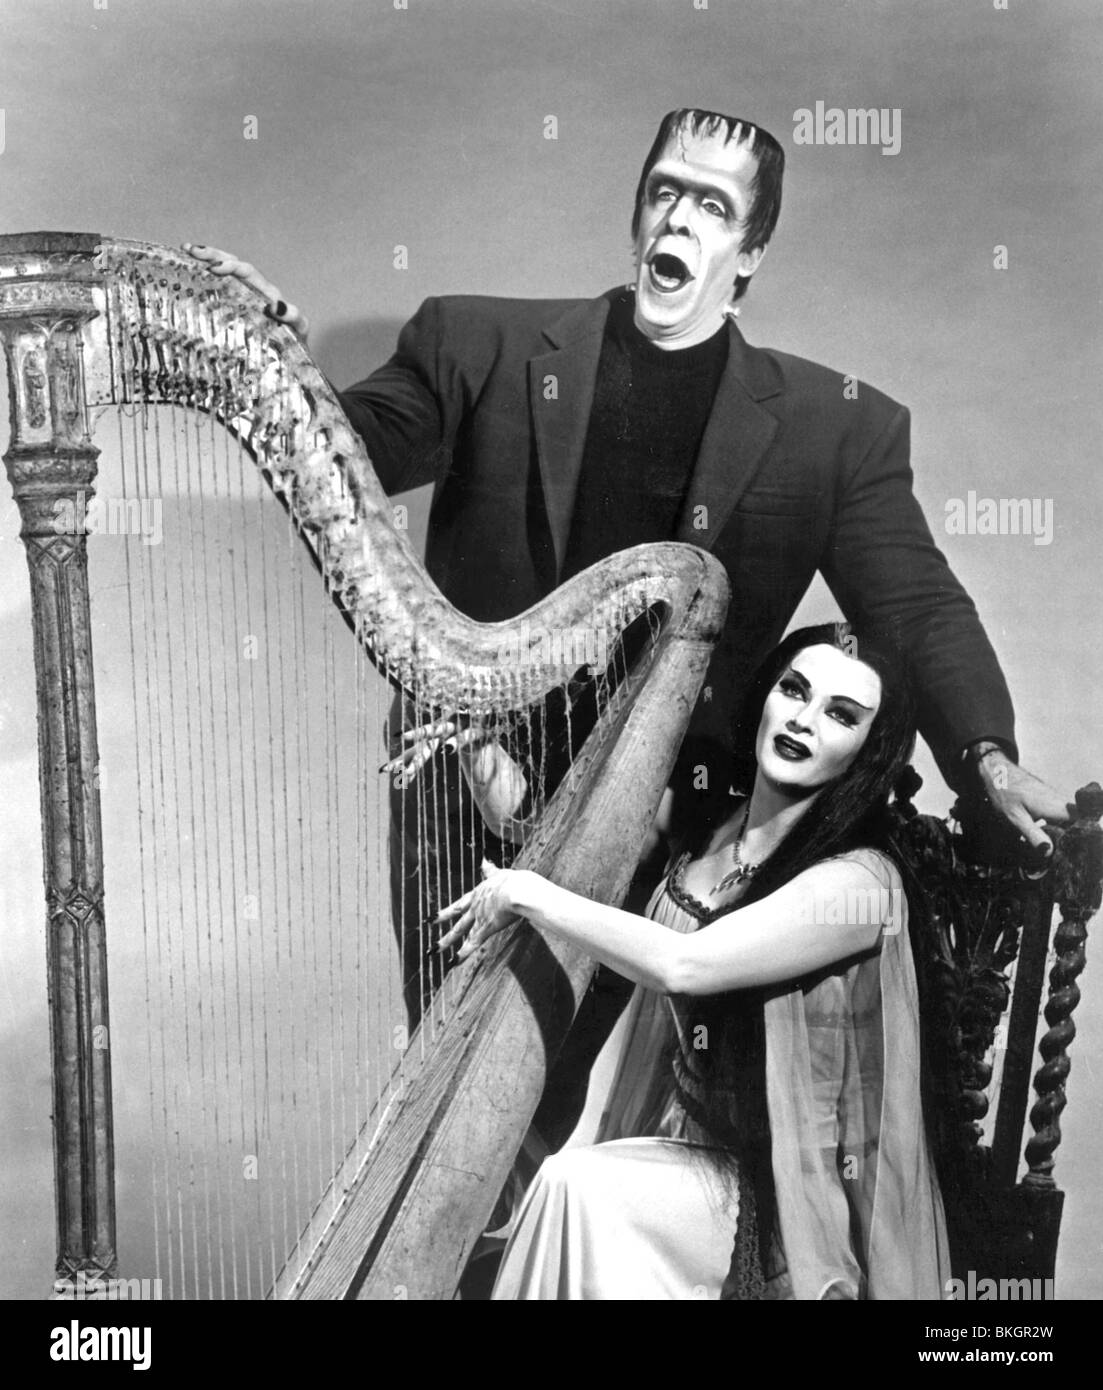 THE MUNSTERS (TV) FRED GWYNNE, YVONNE DECARLO MNST 010P Stock Photo